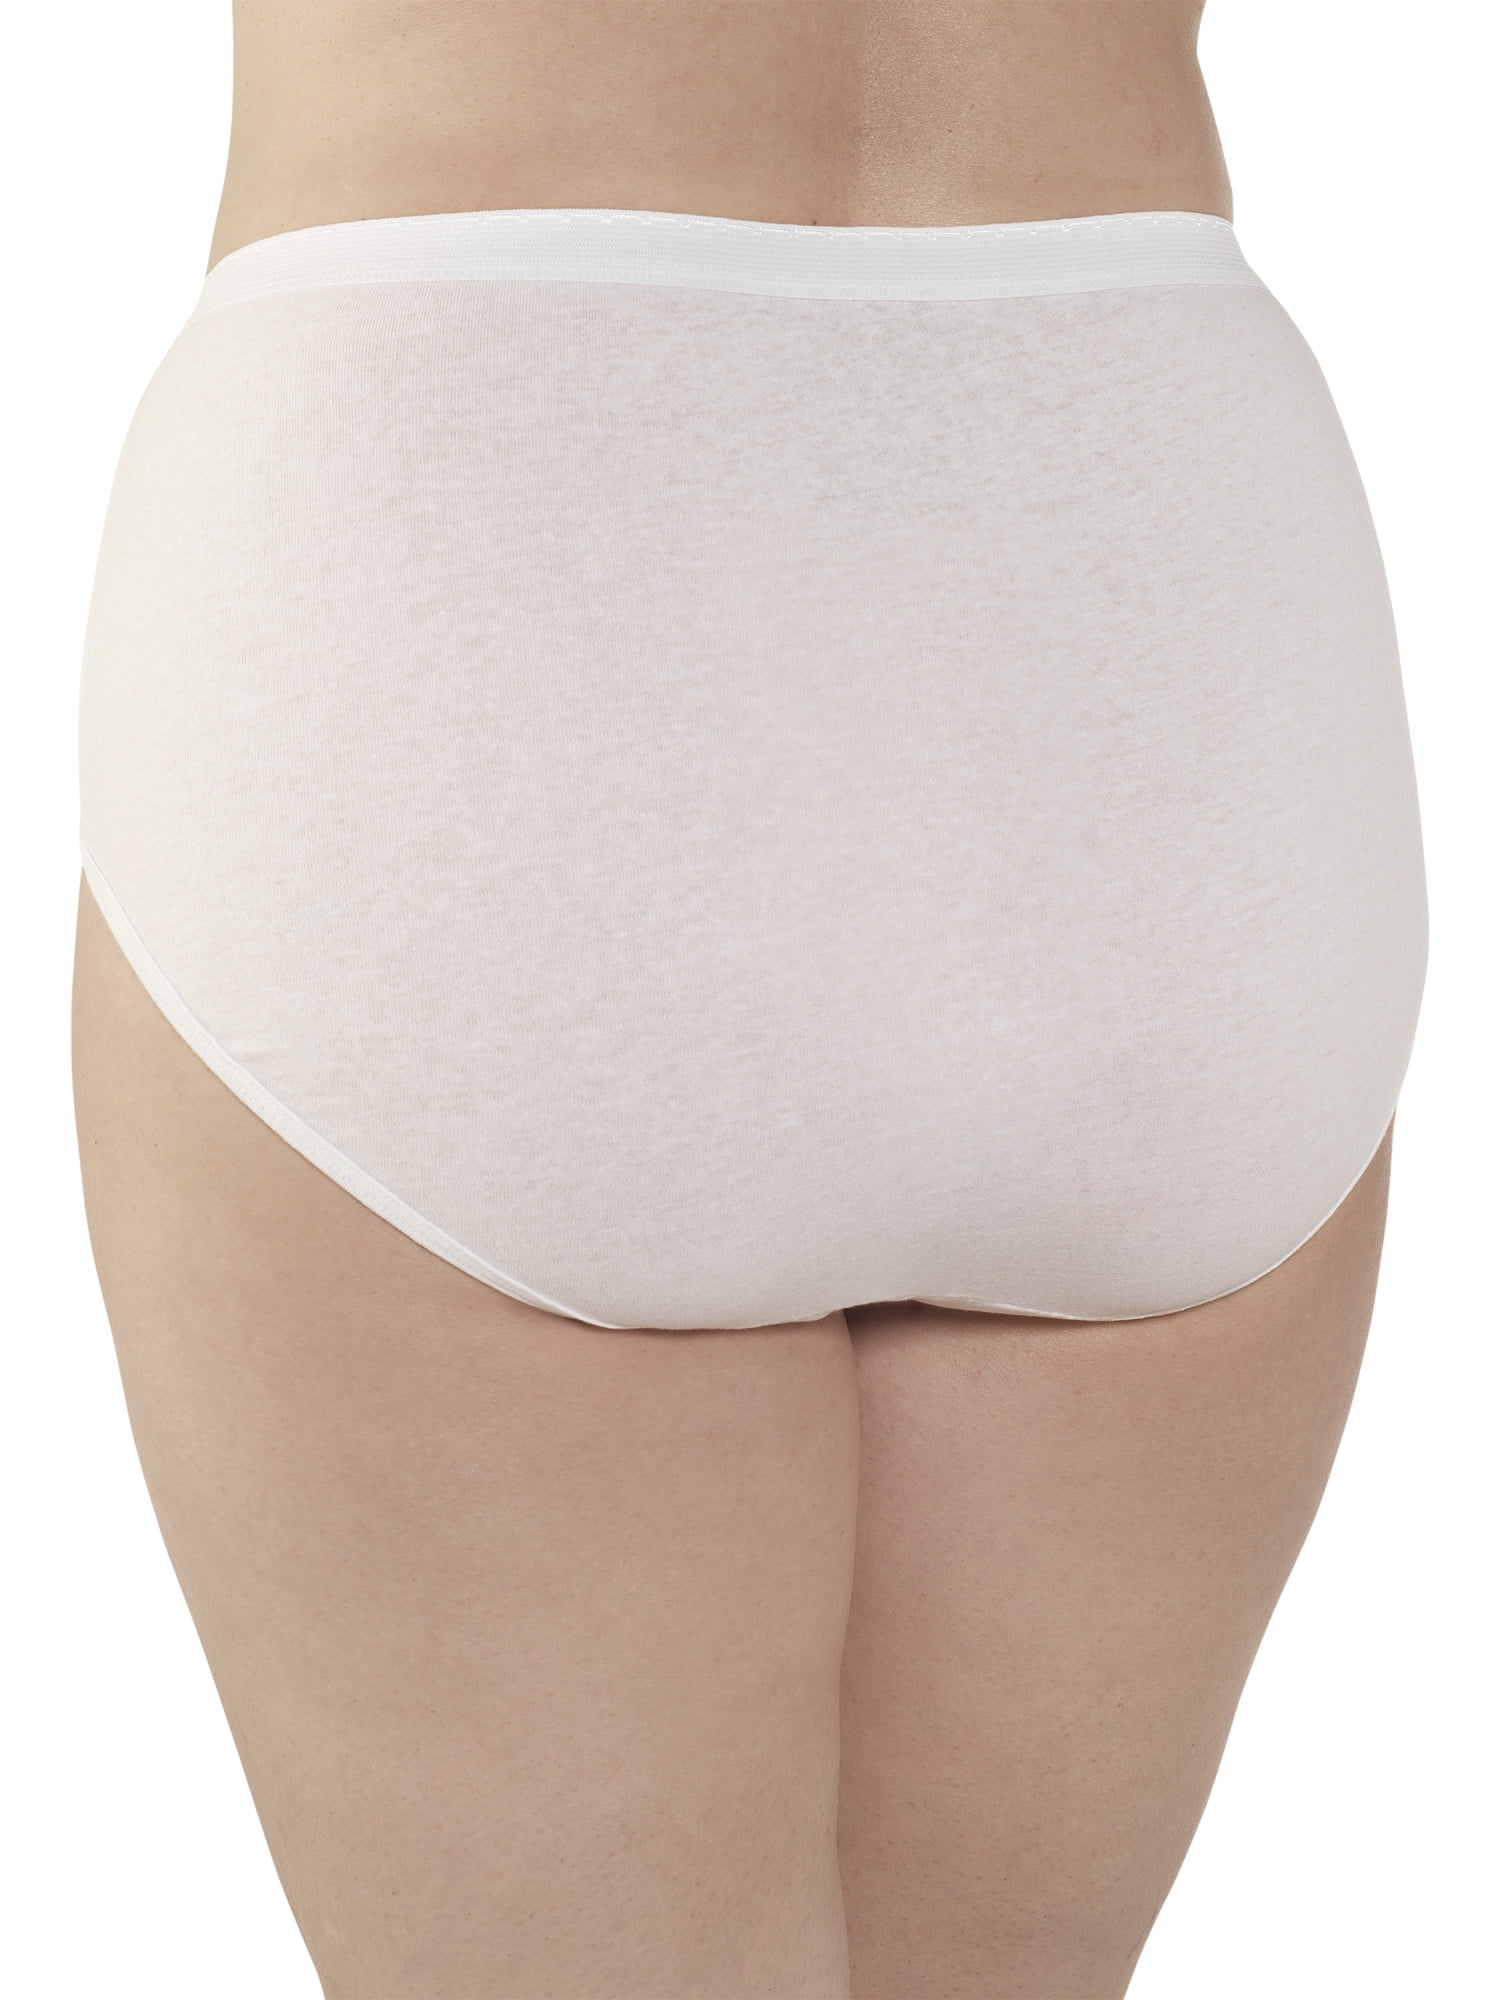 Fit for Me by Fruit of the Loom Women's Plus Cotton White Brief